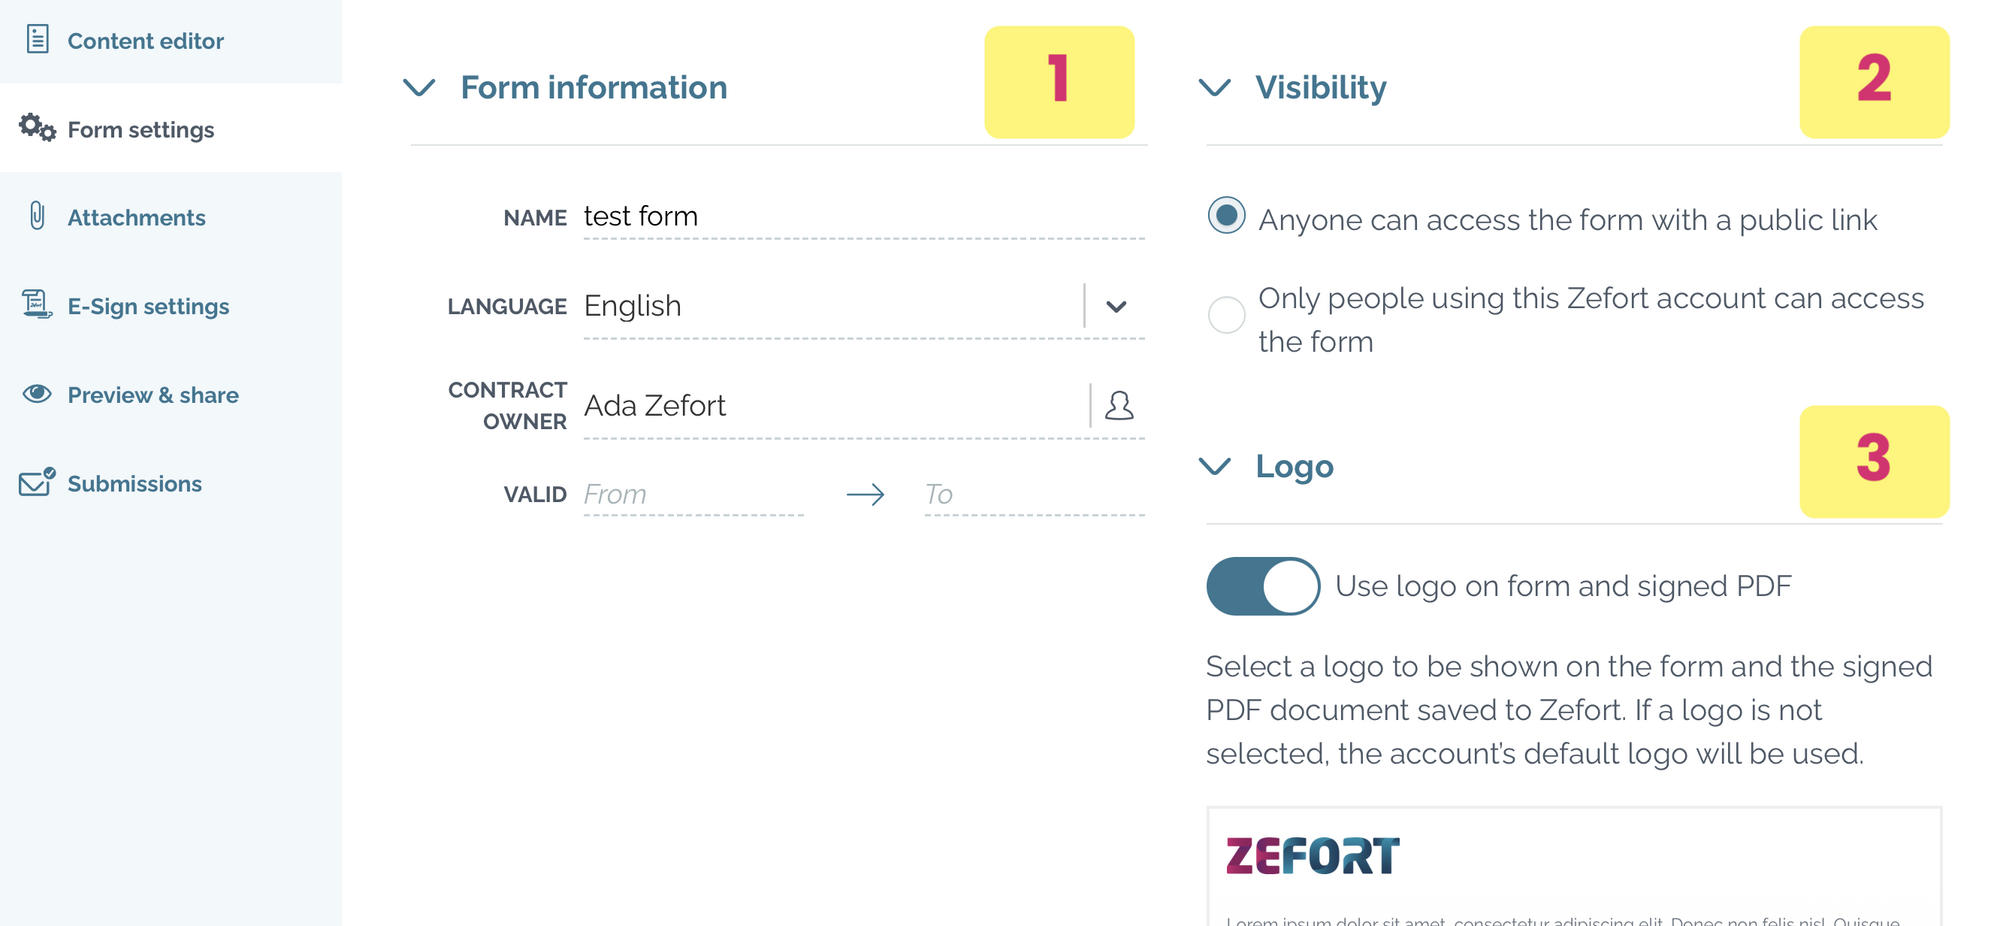 zefort forms - form settings